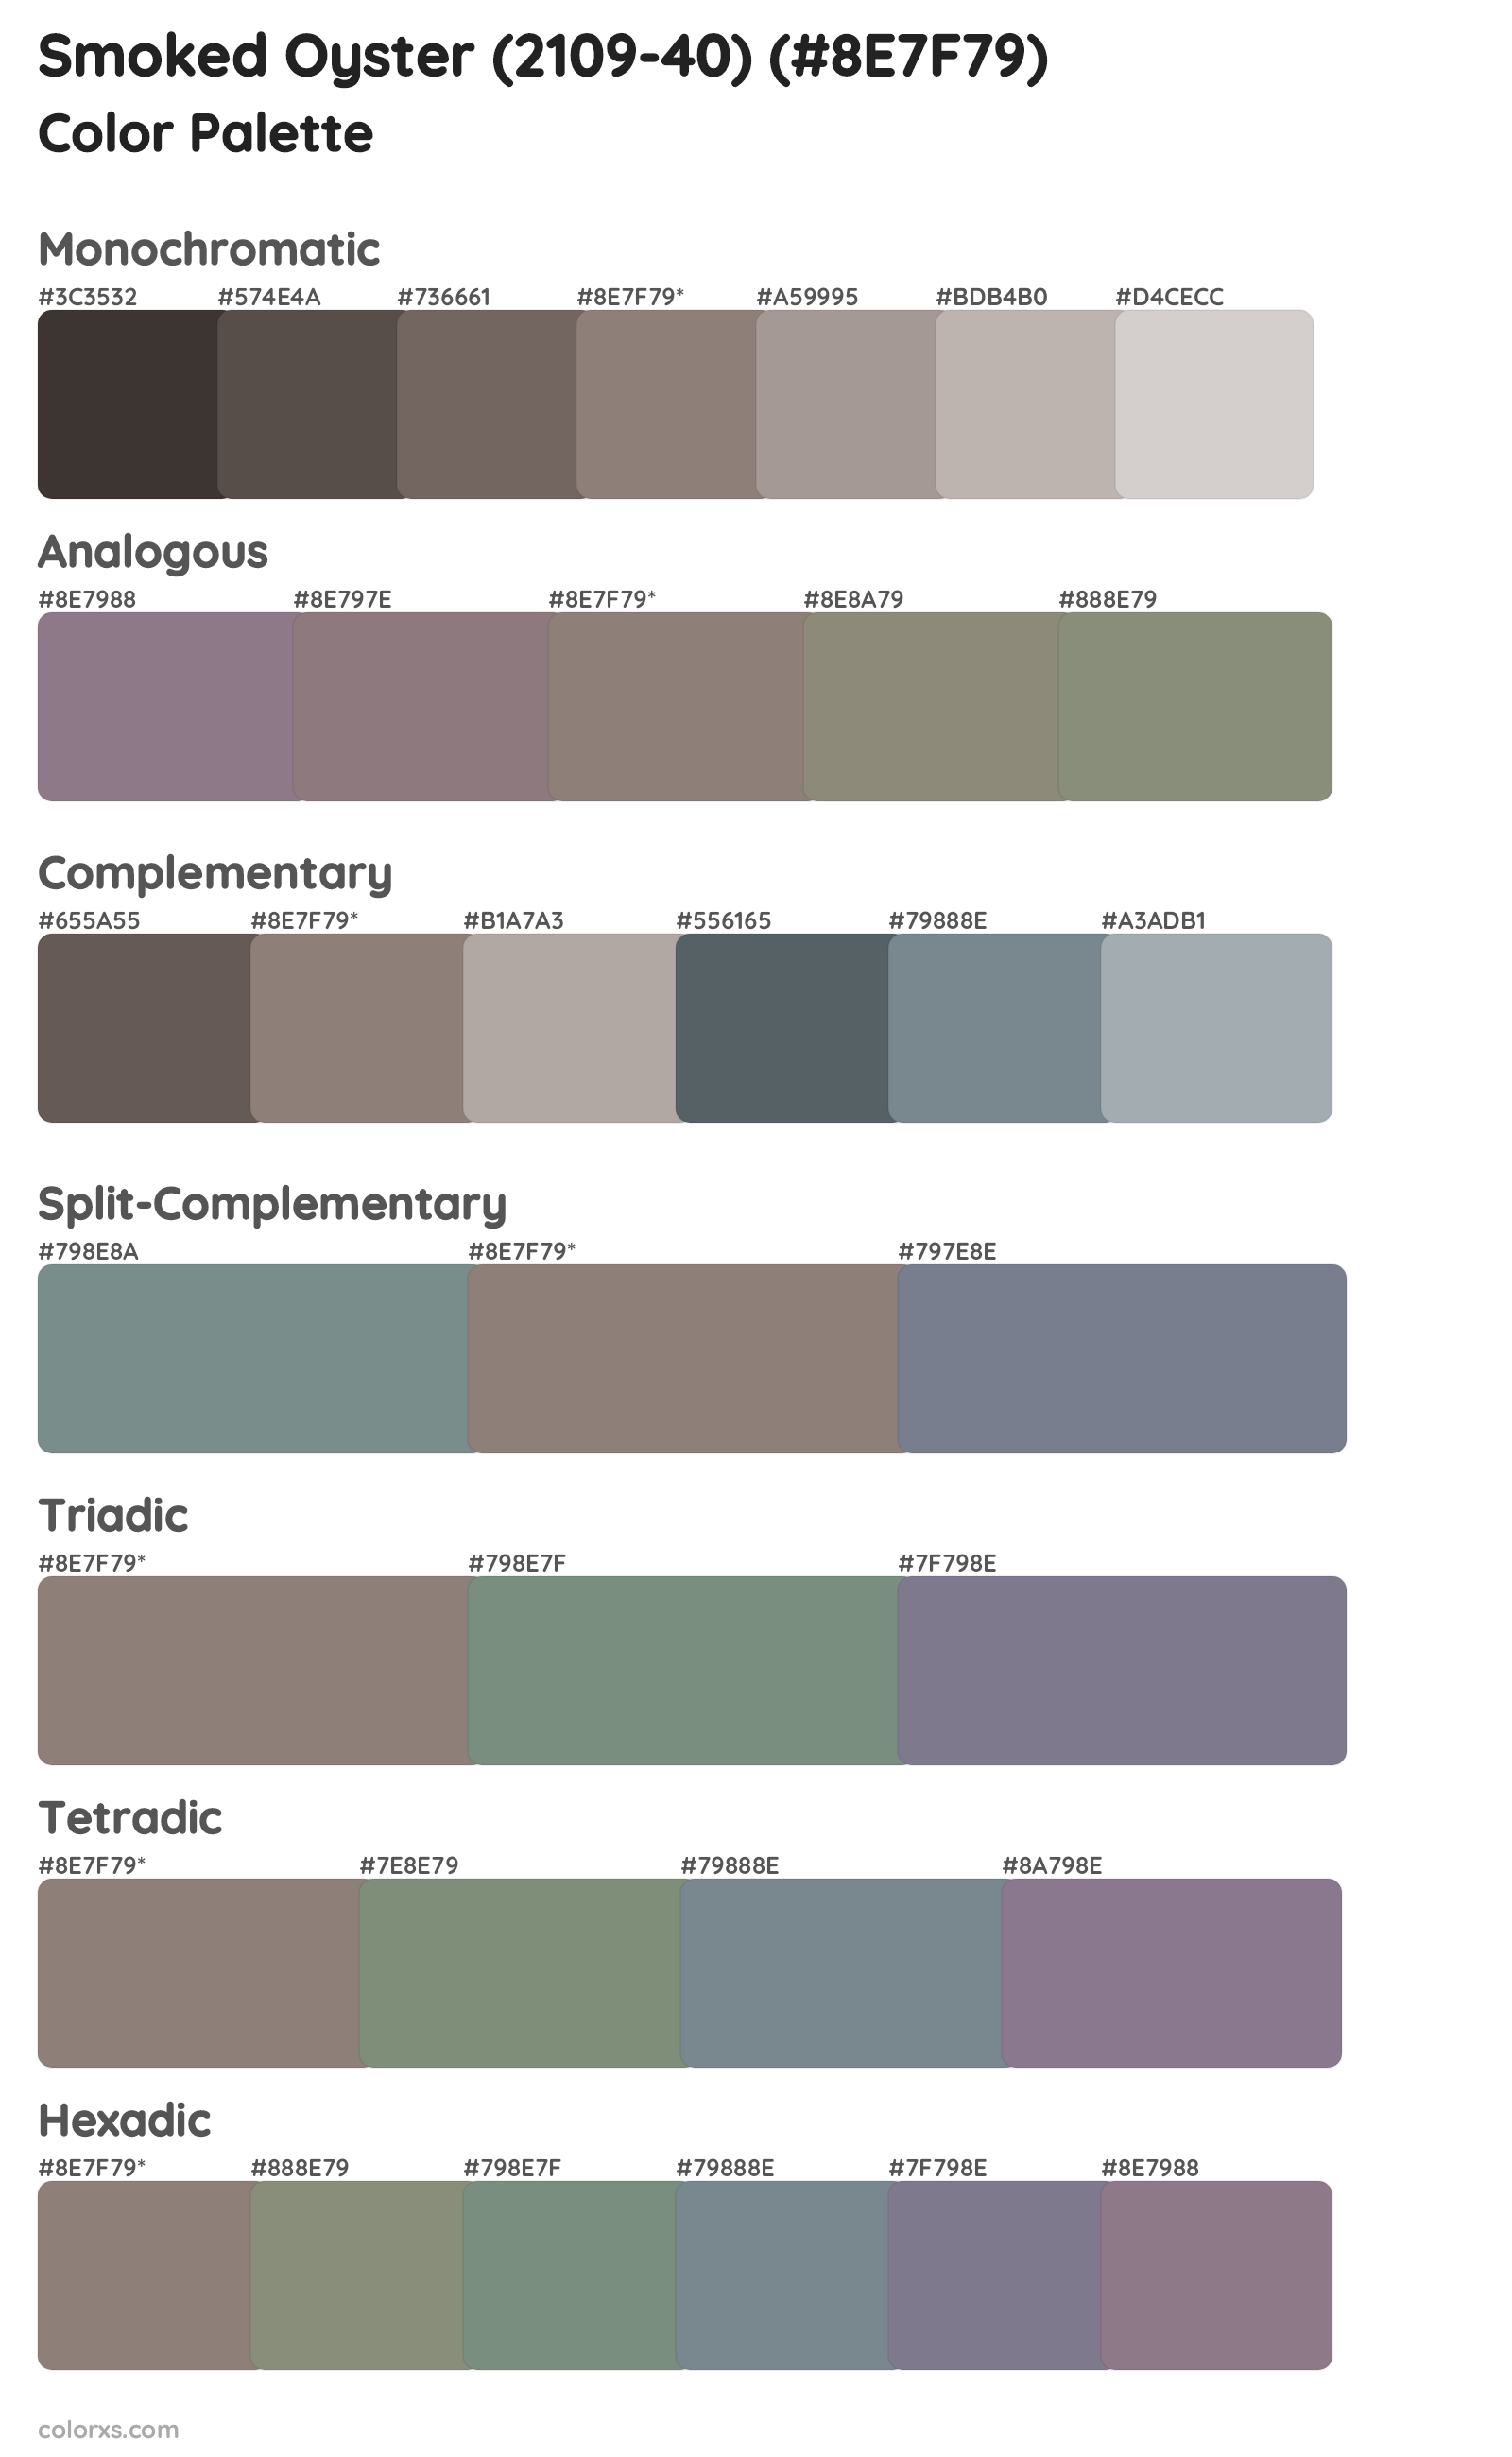 Smoked Oyster (2109-40) Color Scheme Palettes